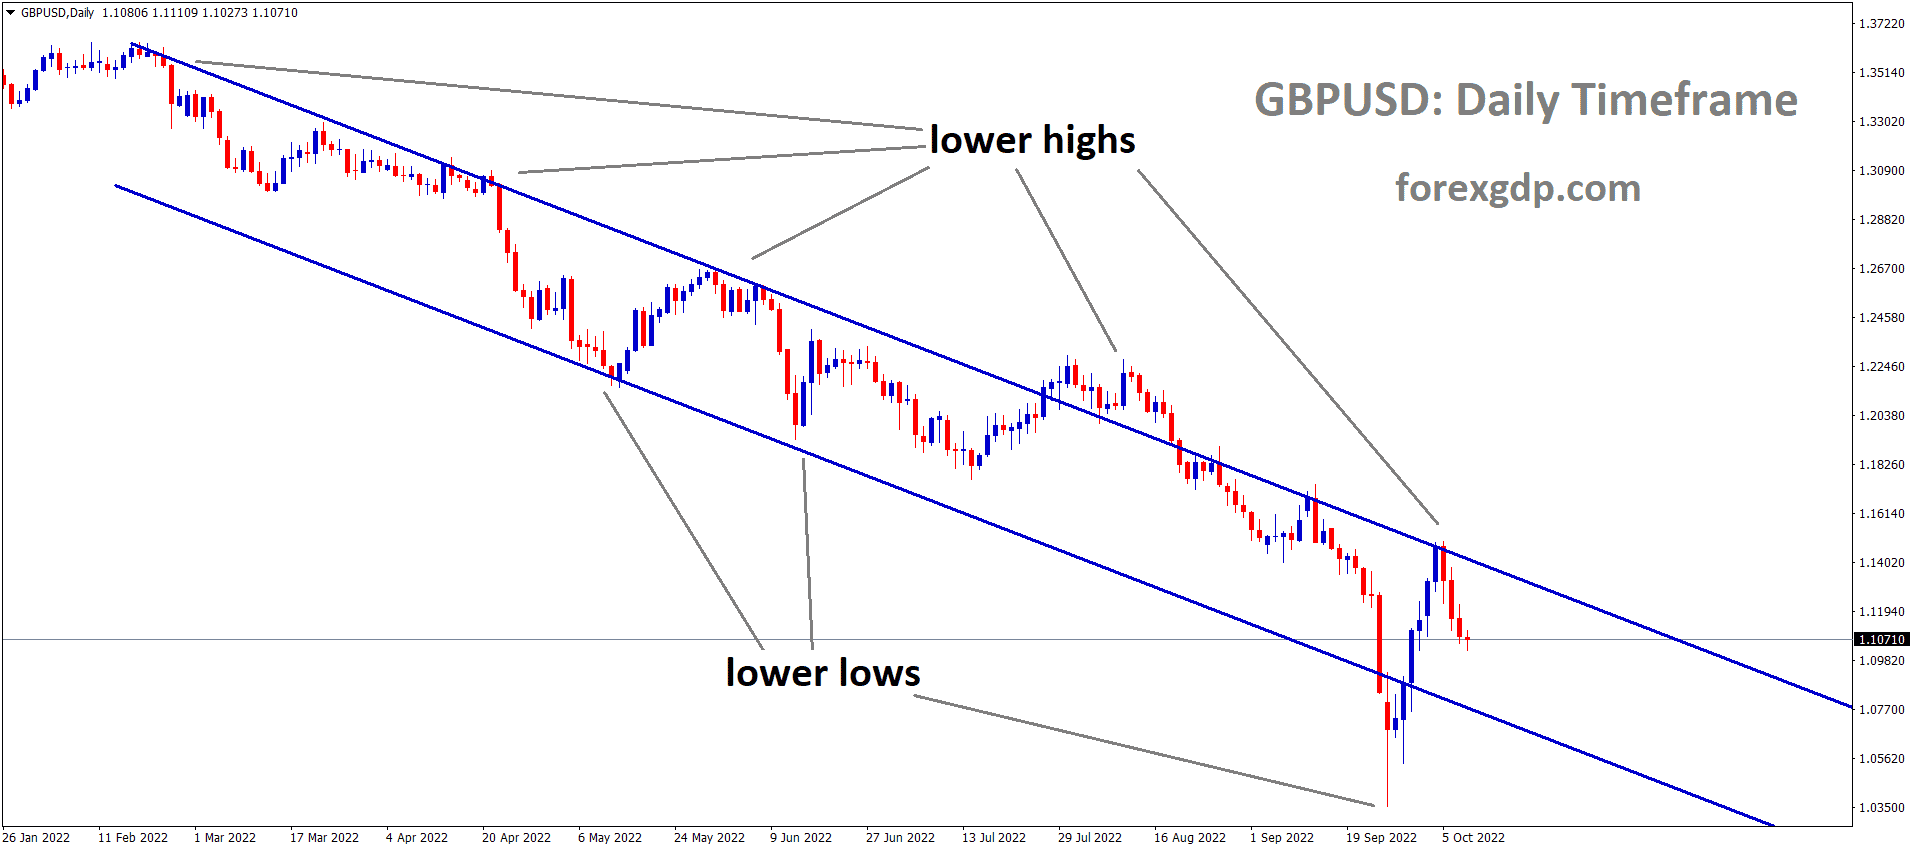 GBPUSD is moving in the Descending channel and the market has fallen from the lower high area of the channel 2